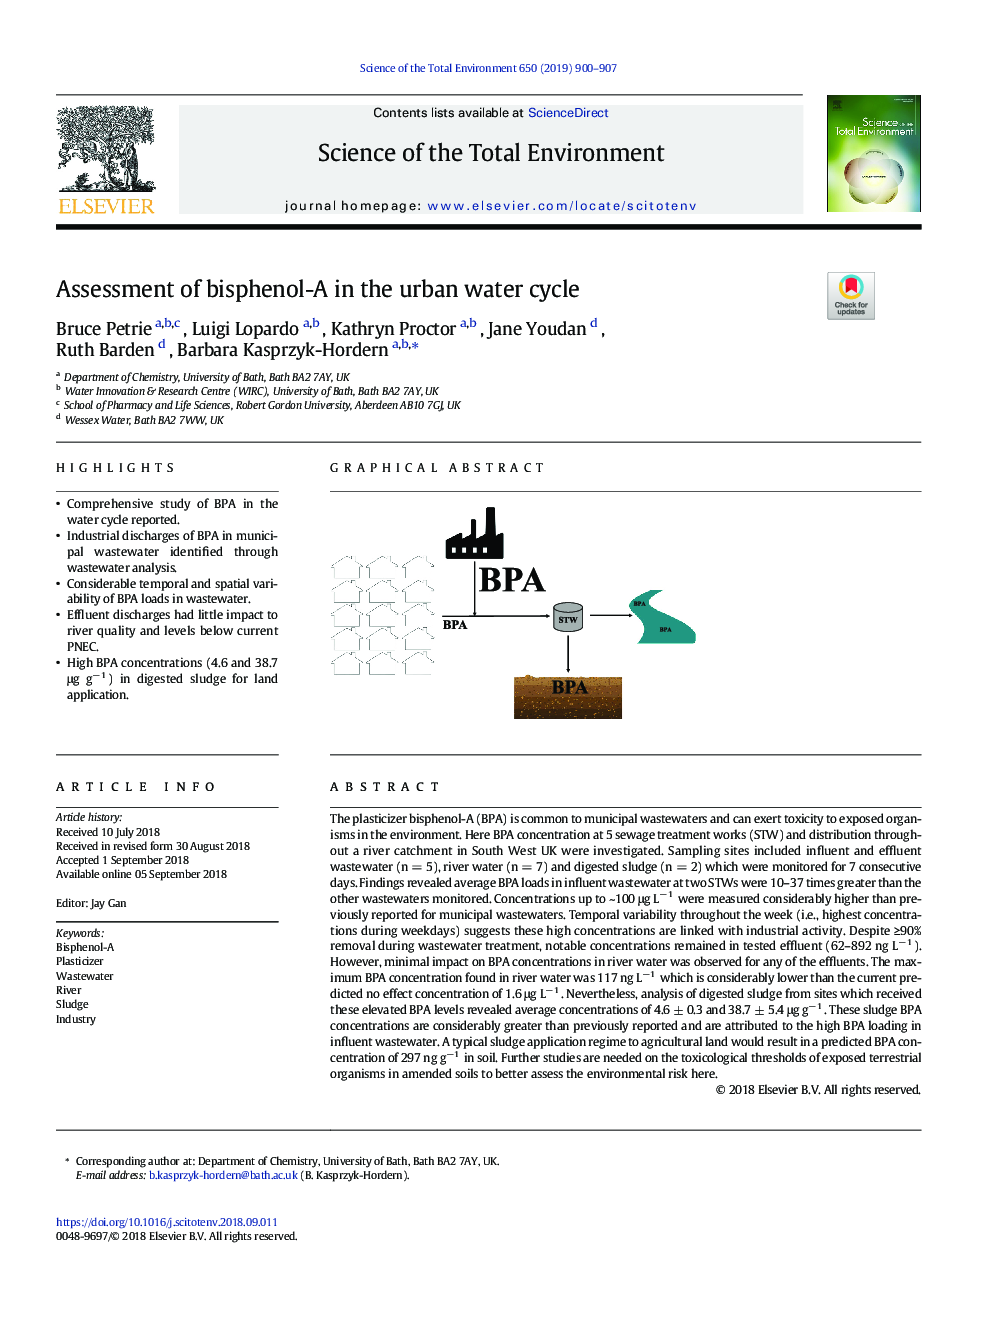 Assessment of bisphenol-A in the urban water cycle